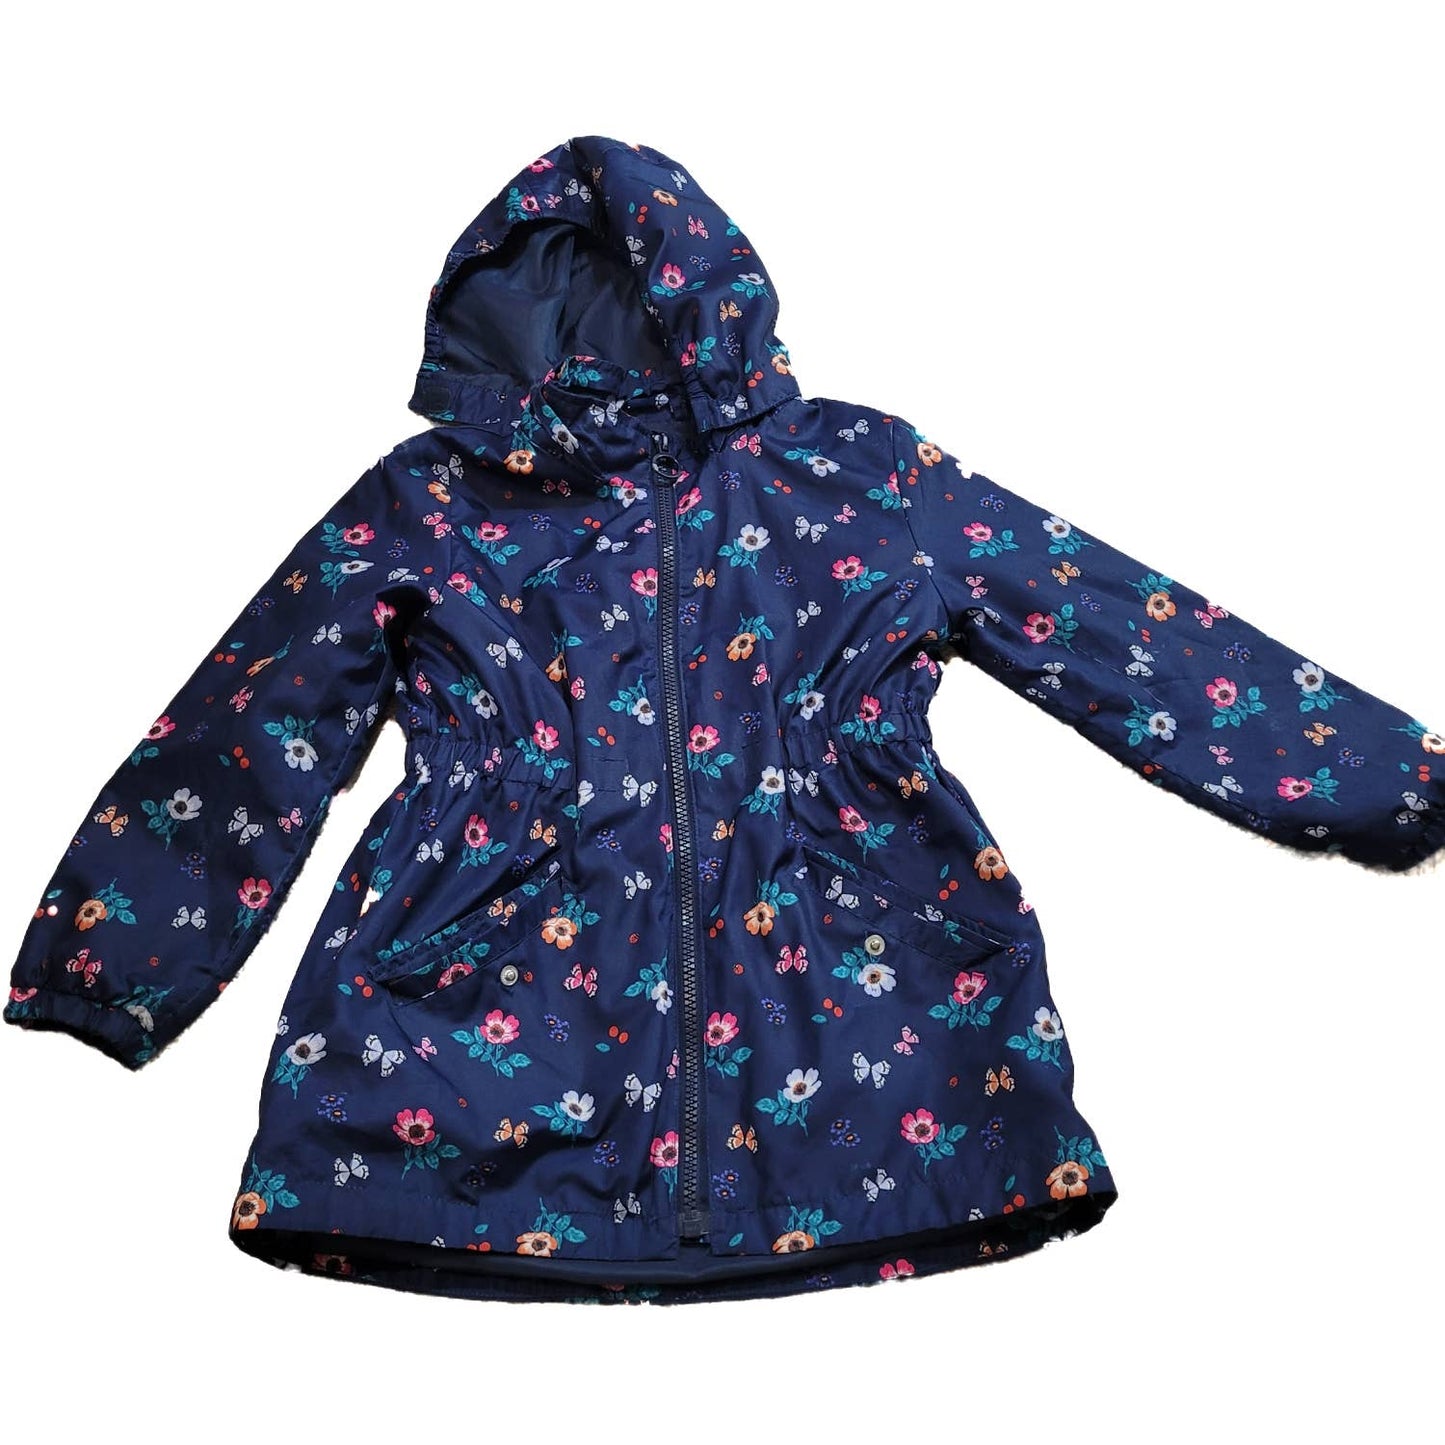 H&M Navy Blue WIndbreaker with Flowers and Butterflys - Size 5-6Y